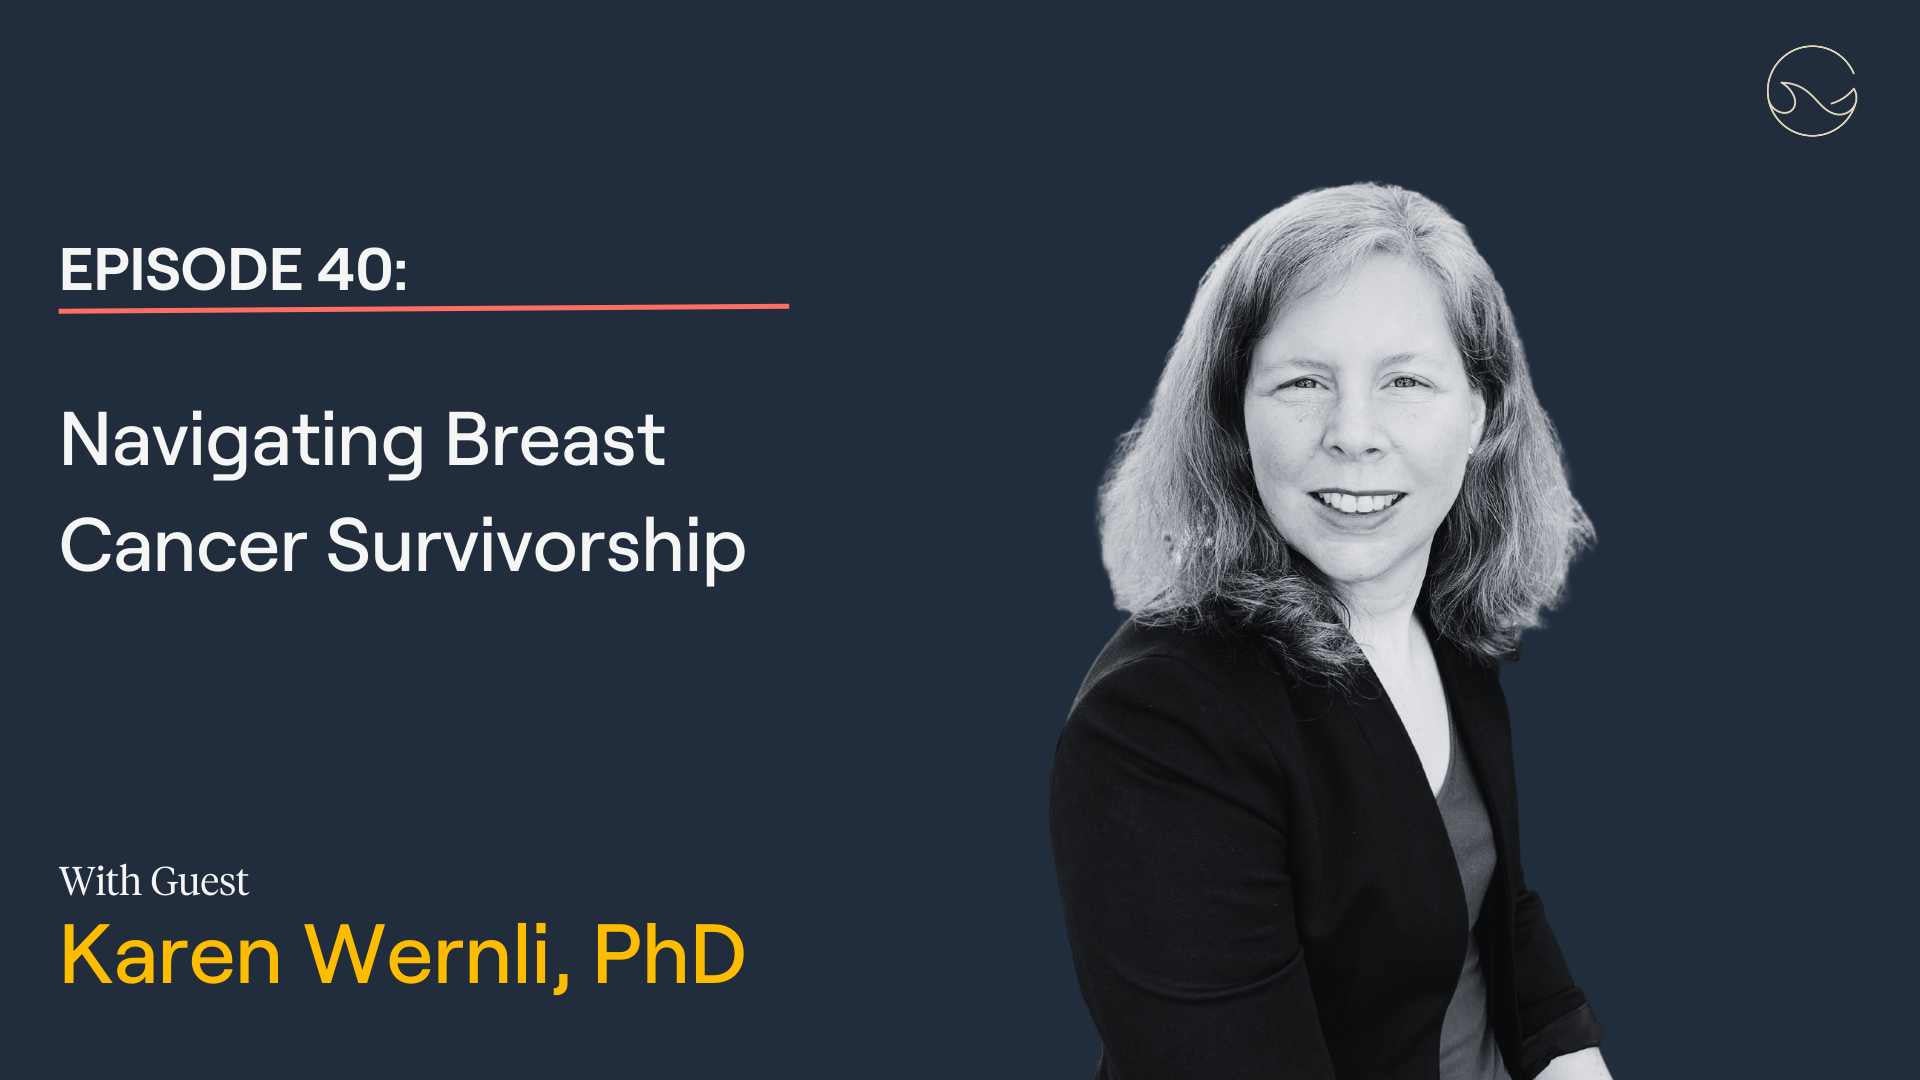 Load video: The latest episode of &quot;The Patient from Hell&quot; features Dr. Karen Wernli, Senior Scientific Investigator at Kaiser Permanente Washington Health Research Institute. She discusses survivorship in breast cancer with a comparison of mammograms vs. MRIs for surveillance imaging.